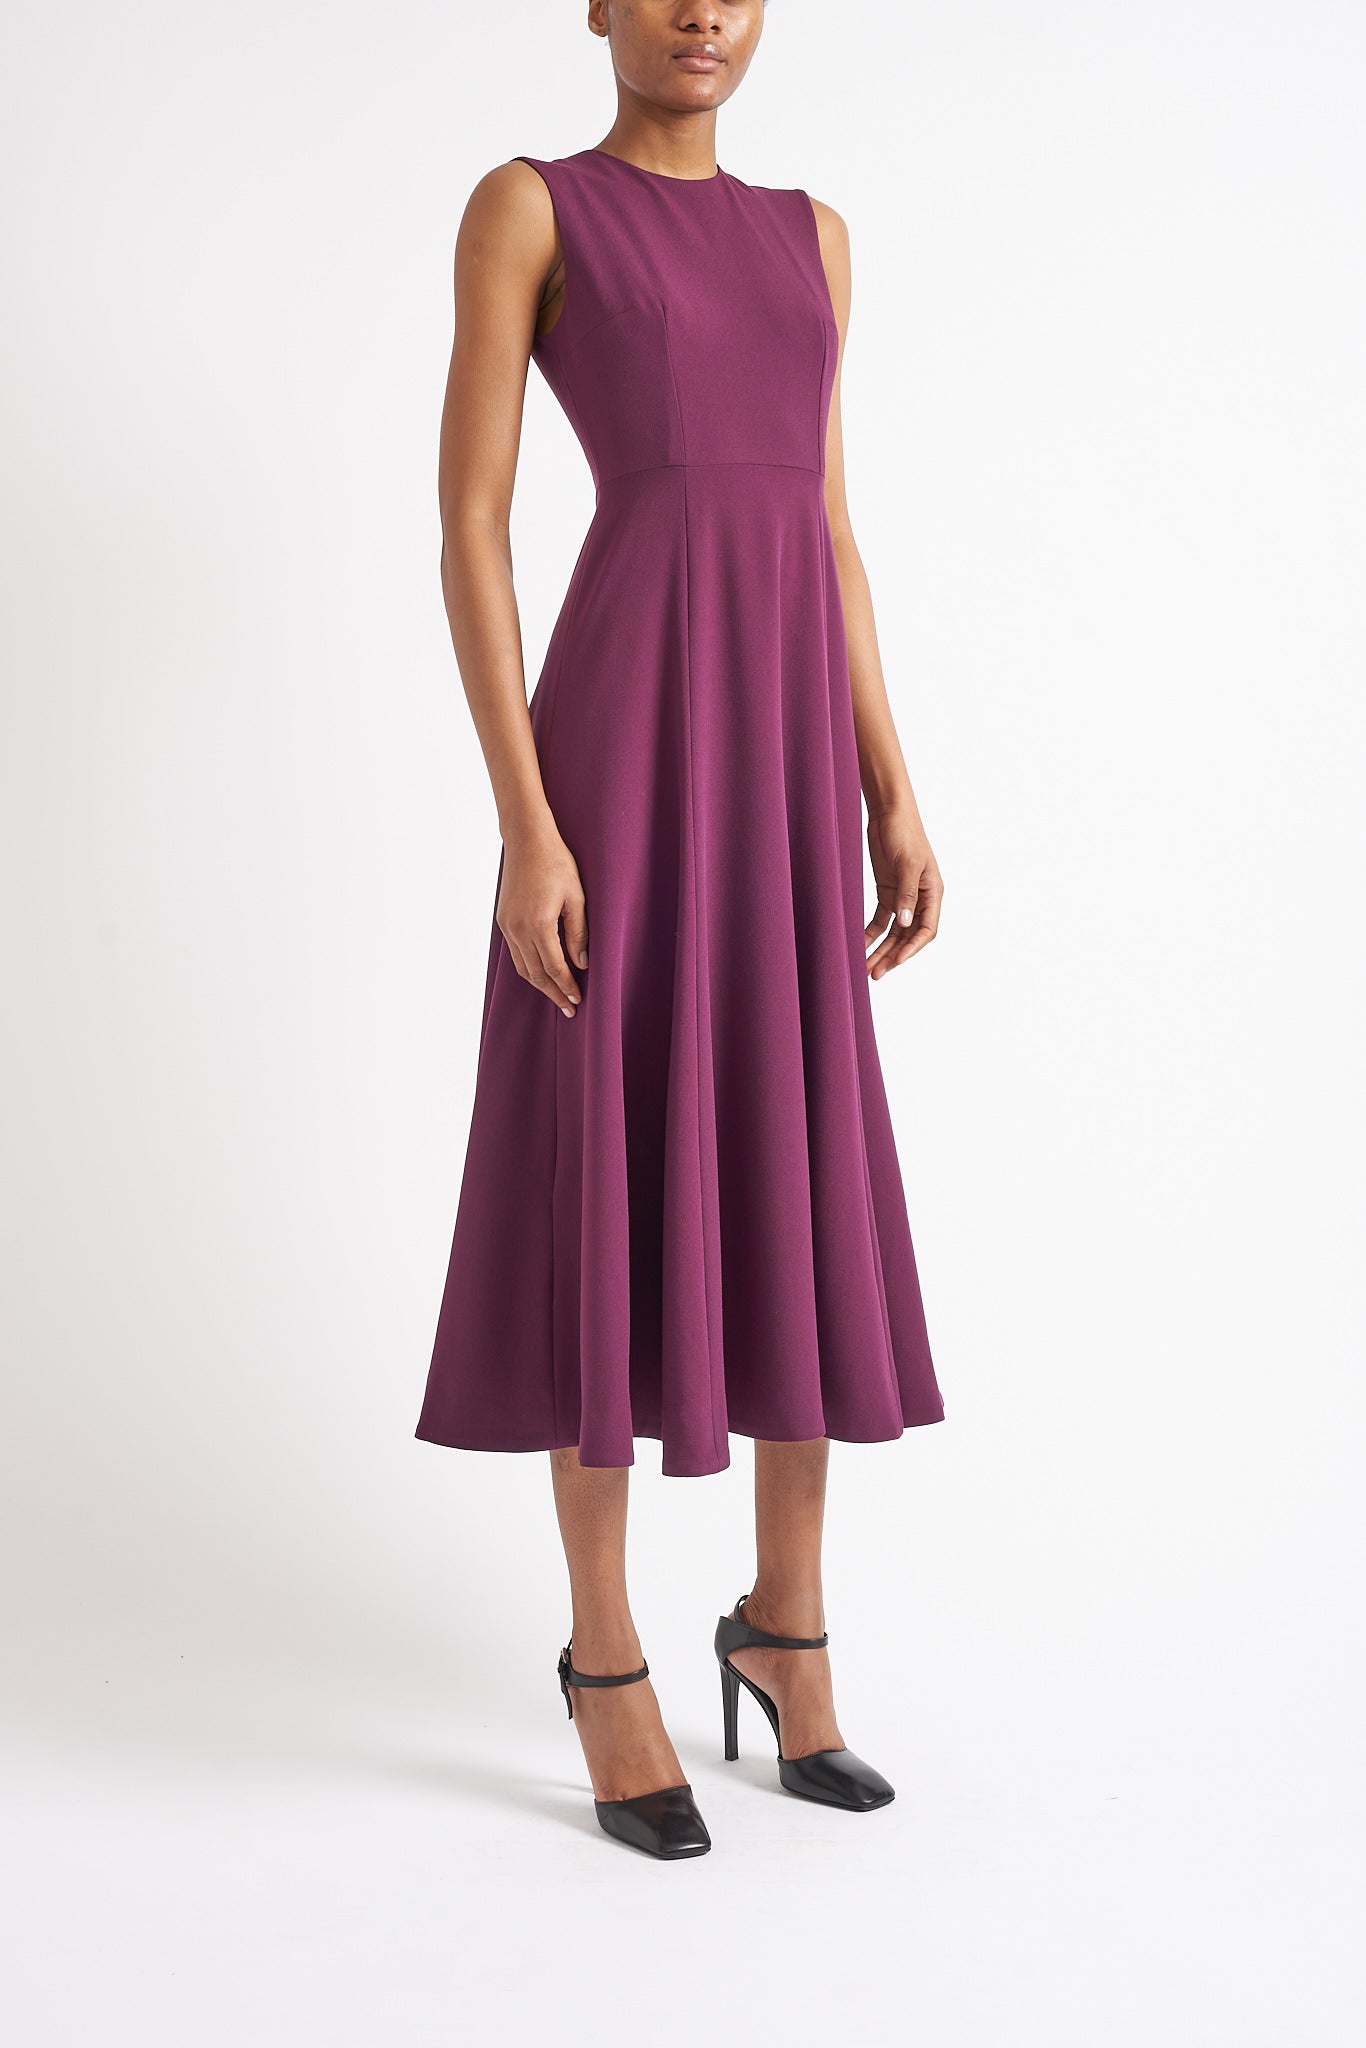 OLIVE SUSTAINABLY SOURCED BLACKBERRY CADY DRESS